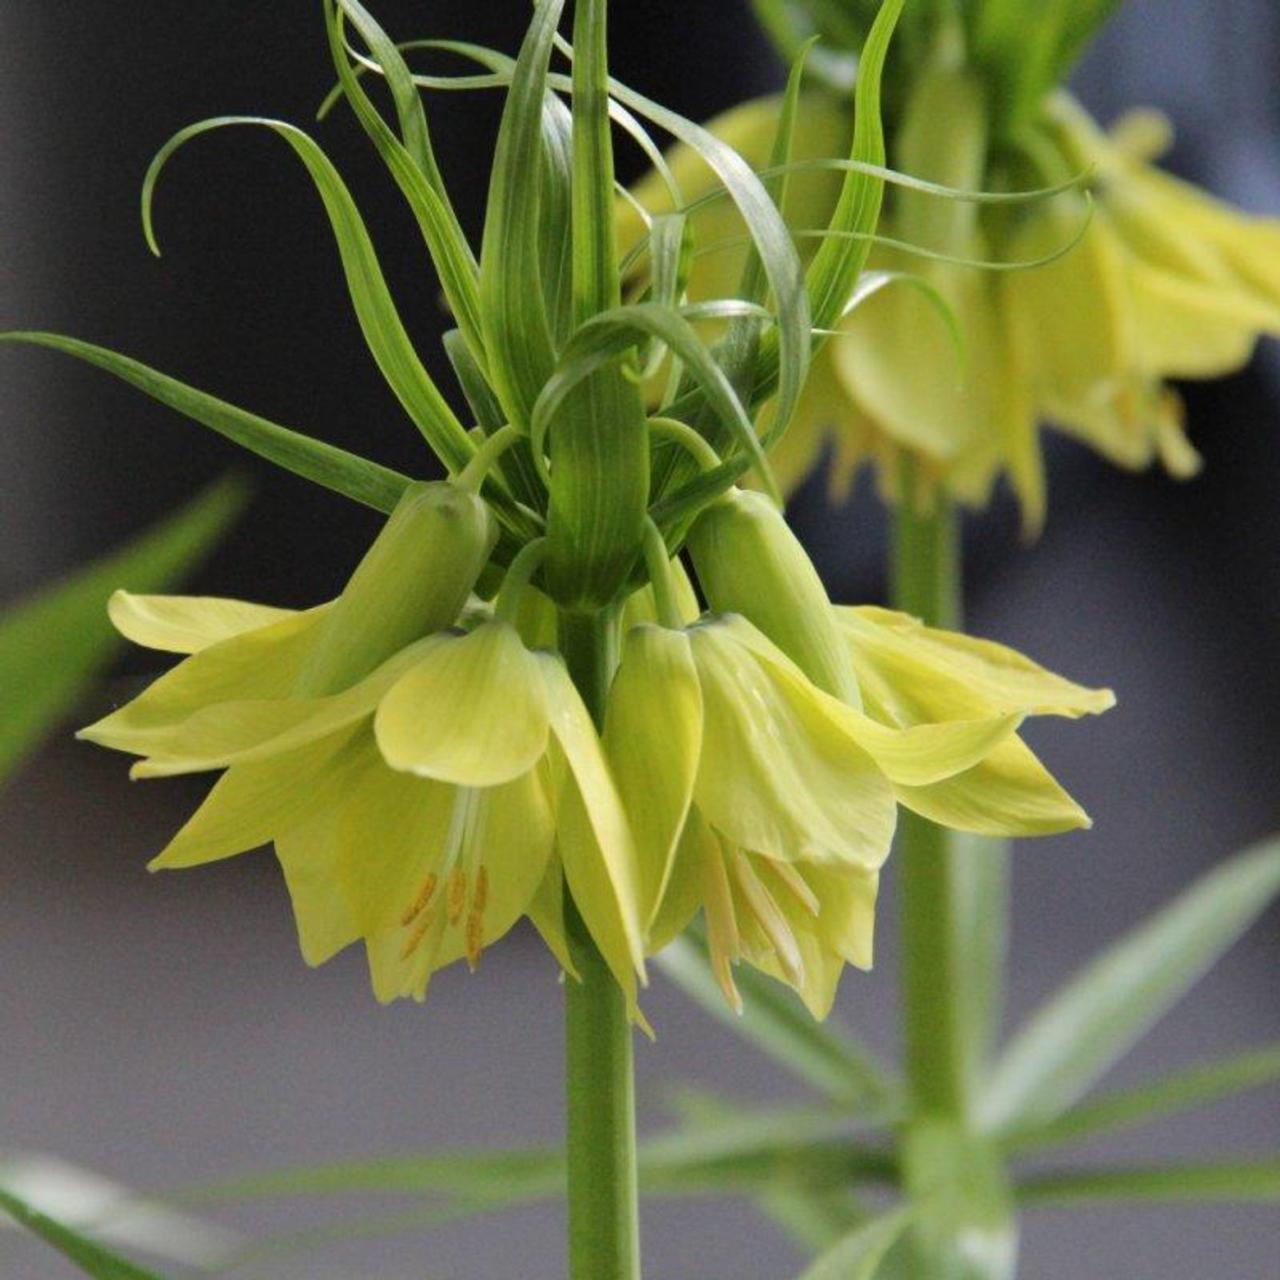 Fritillaria imperialis 'Early Passion' plant